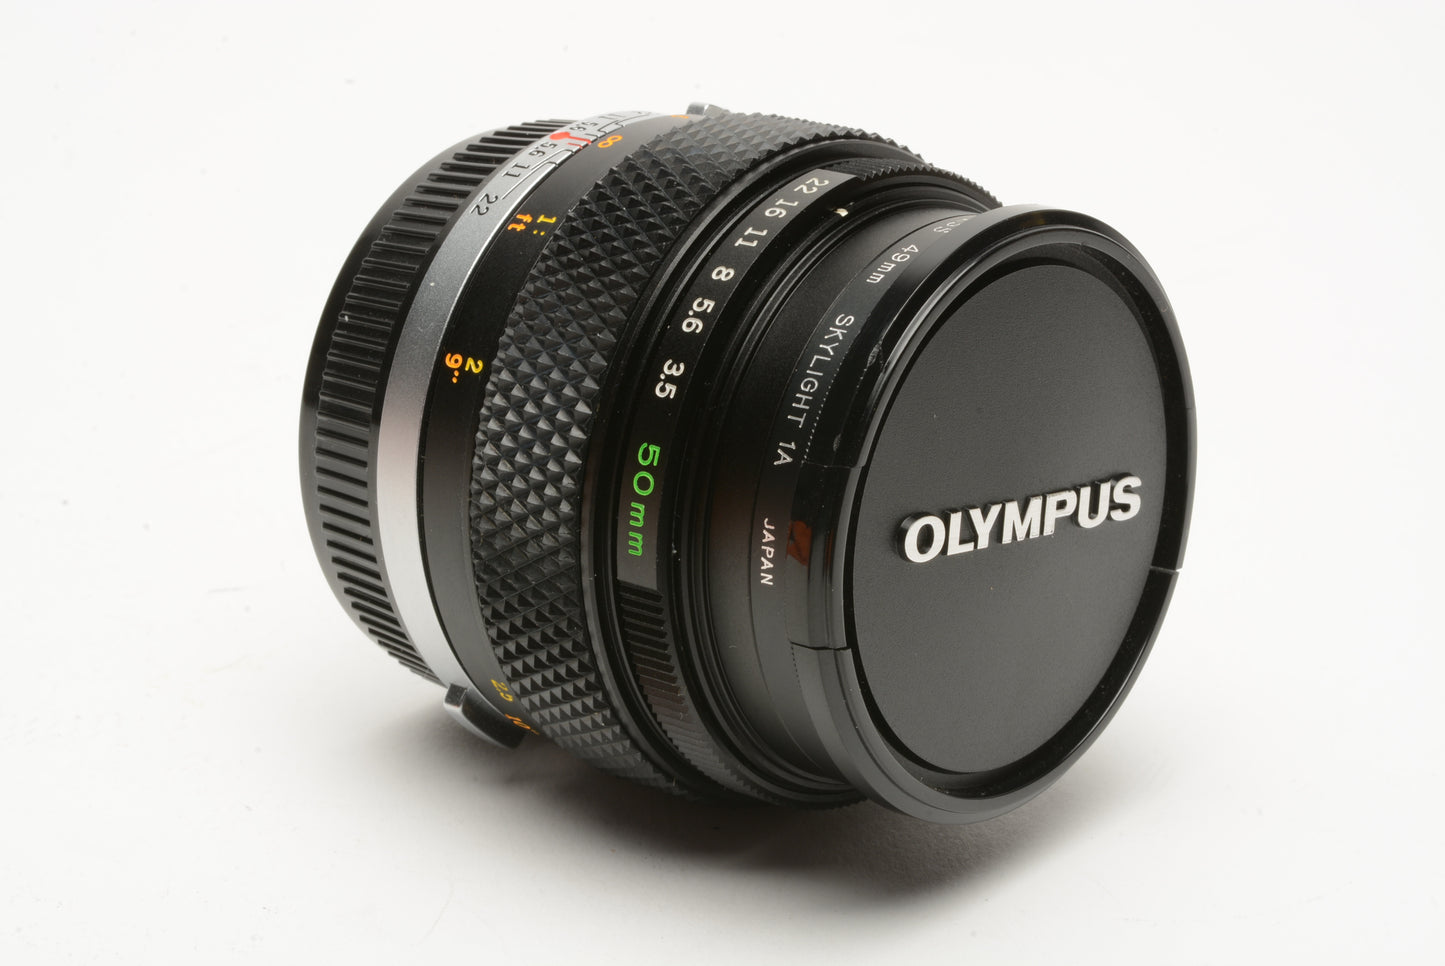 Olympus OM-System 50mm f3.5 Auto Macro lens w/caps, sky filter, very clean